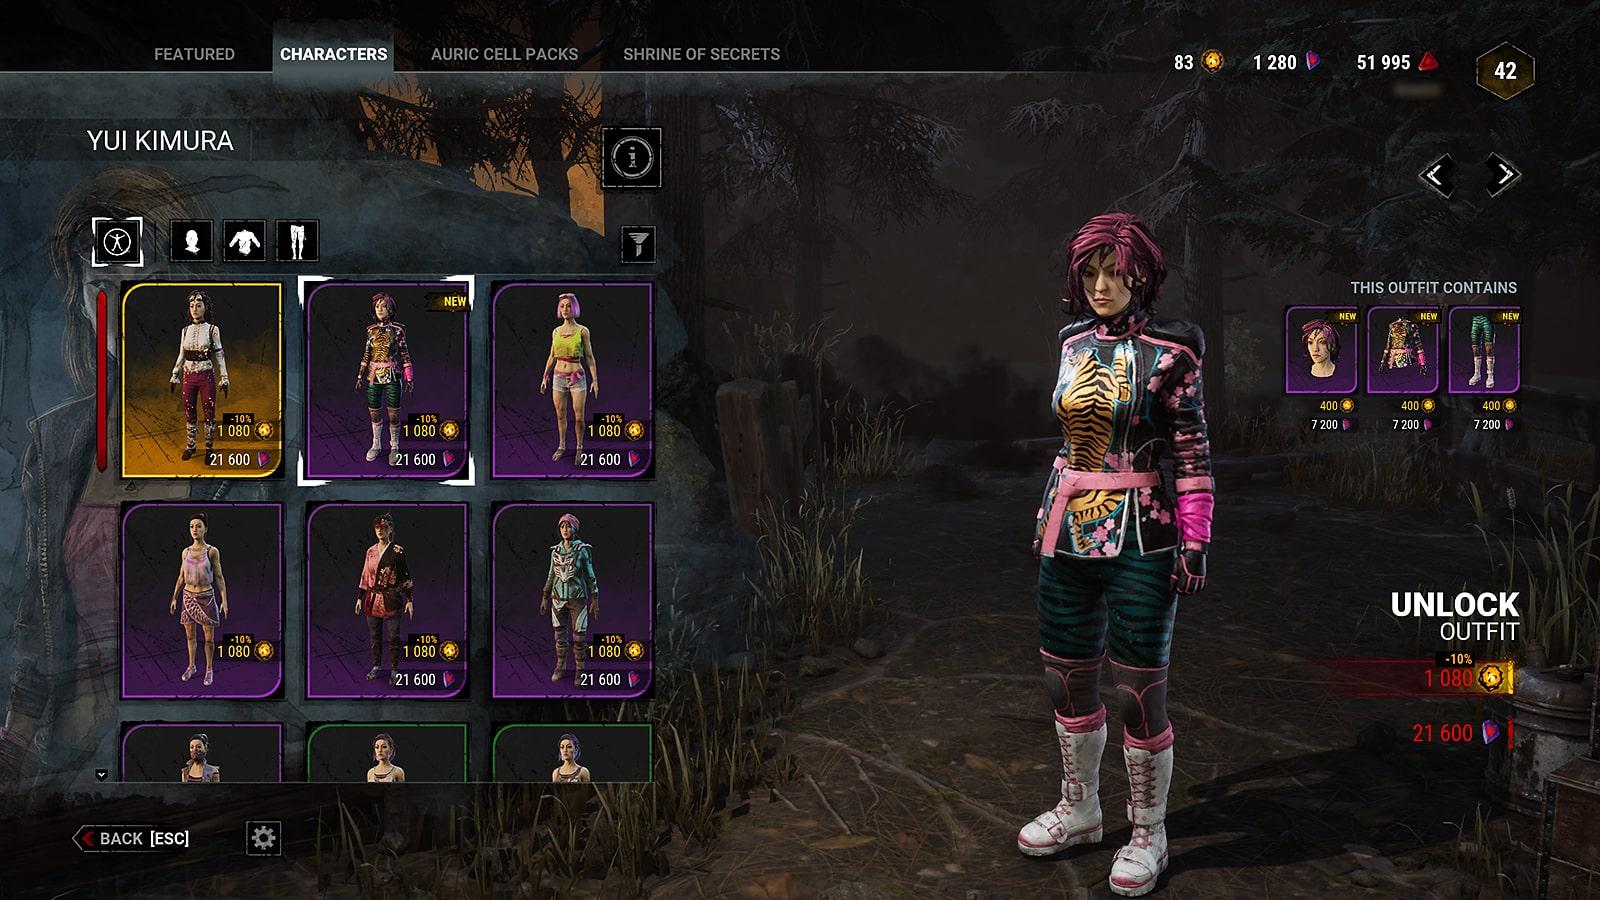 Yui Kimura's new Lurking Stripes outfit in DBD